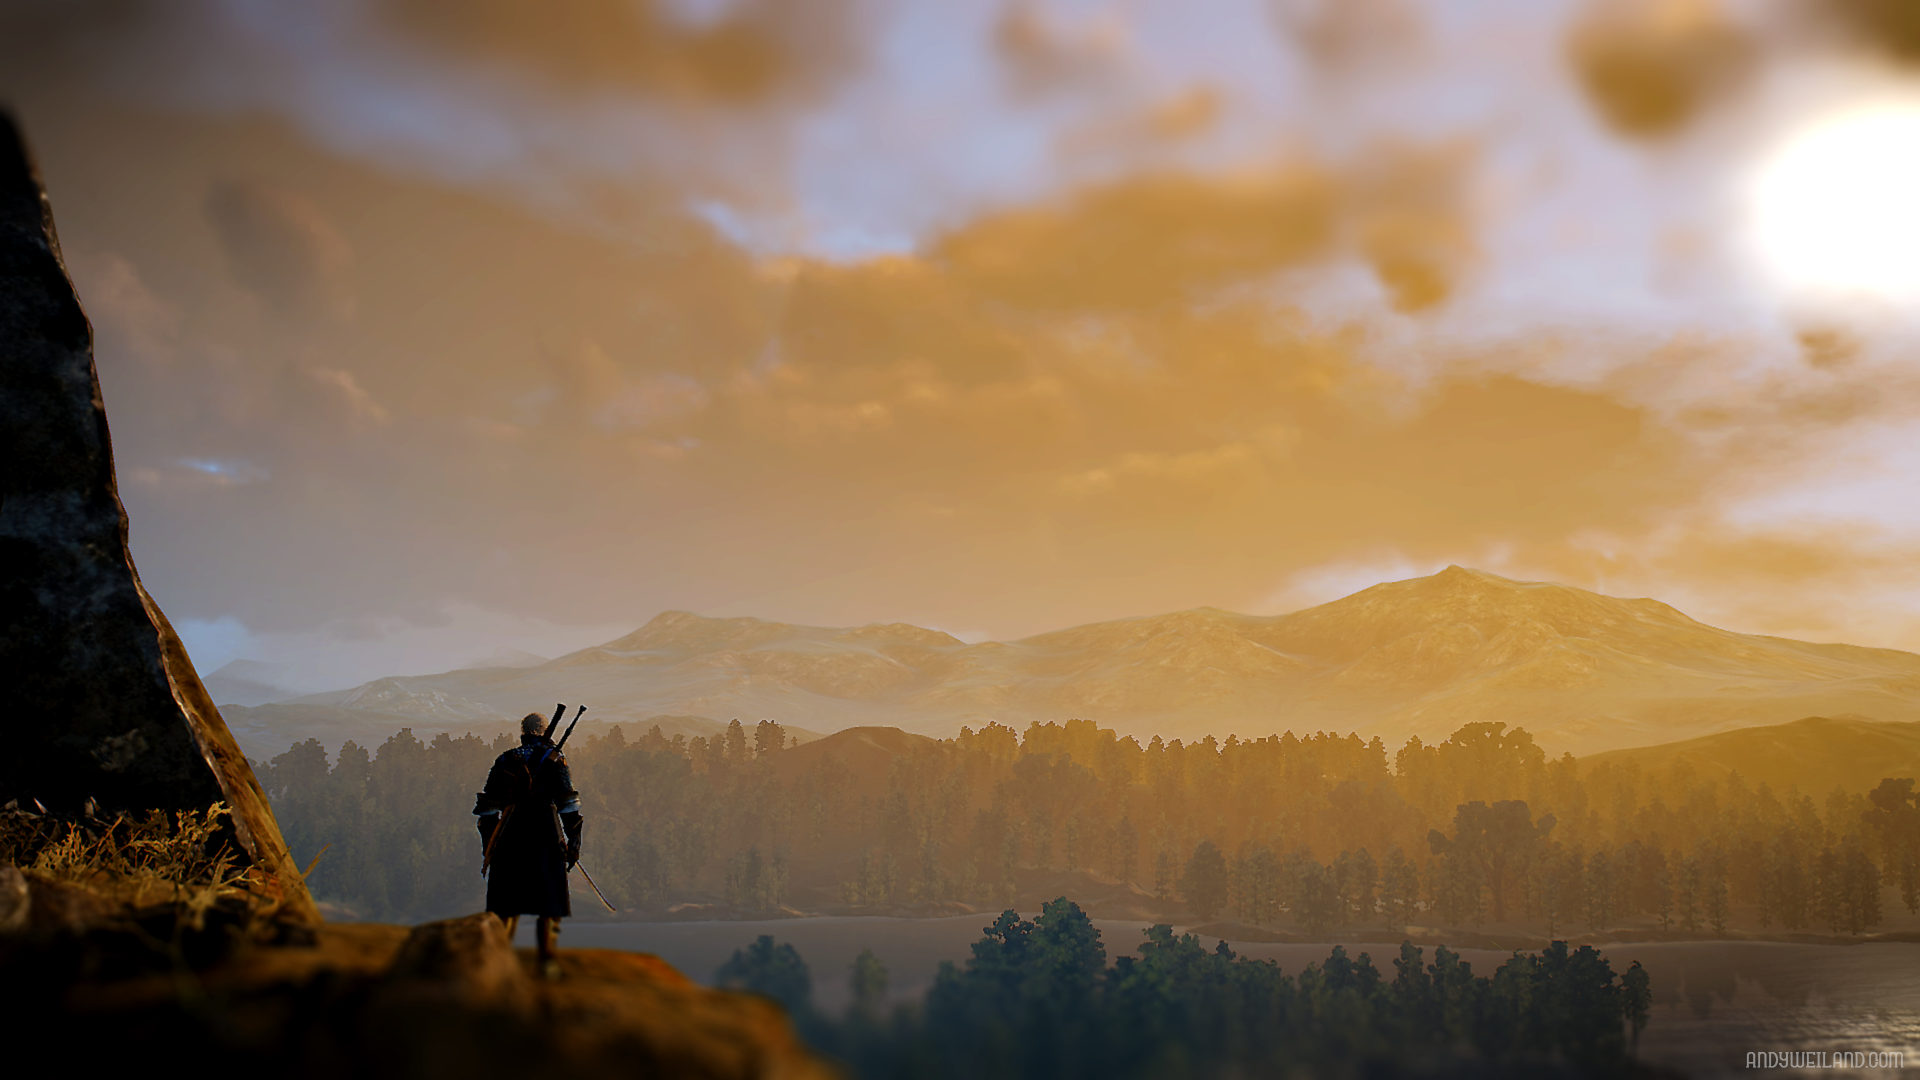 General 1920x1080 The Witcher 3: Wild Hunt The Witcher Geralt of Rivia sunset PC gaming video games